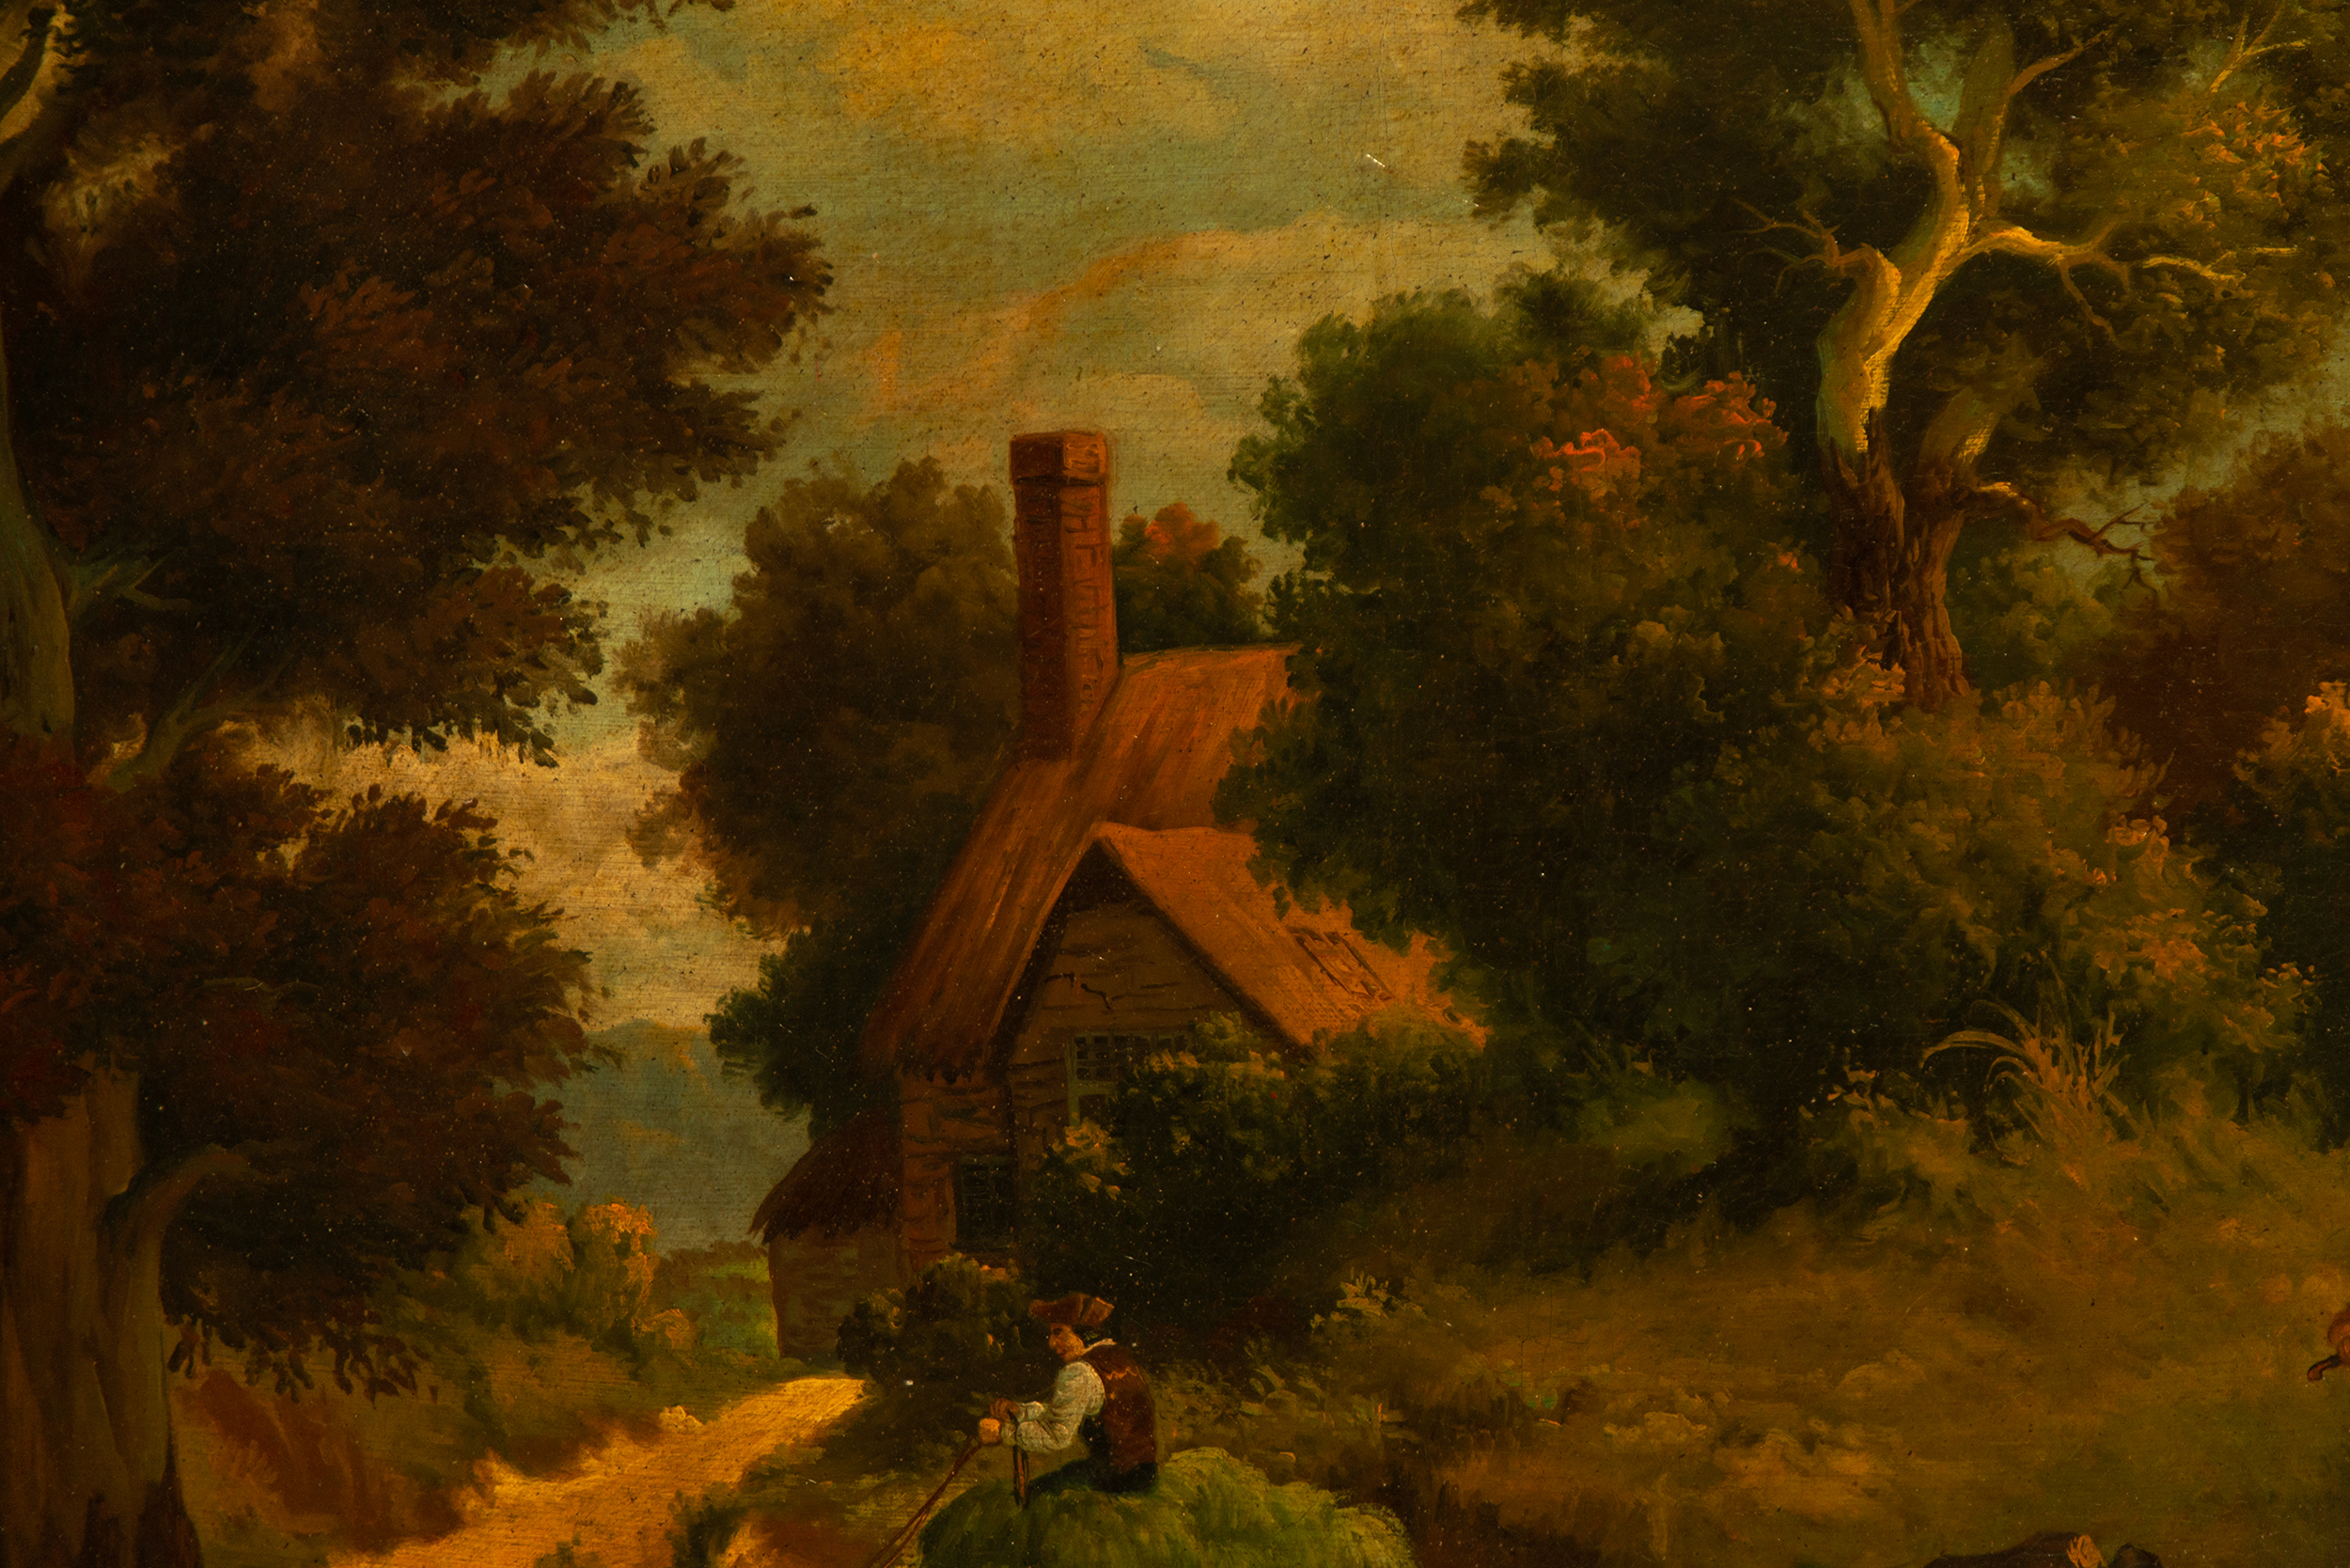 Country Scene with Woodcutters, 19th century Dutch school, following 17th century models - Image 4 of 6